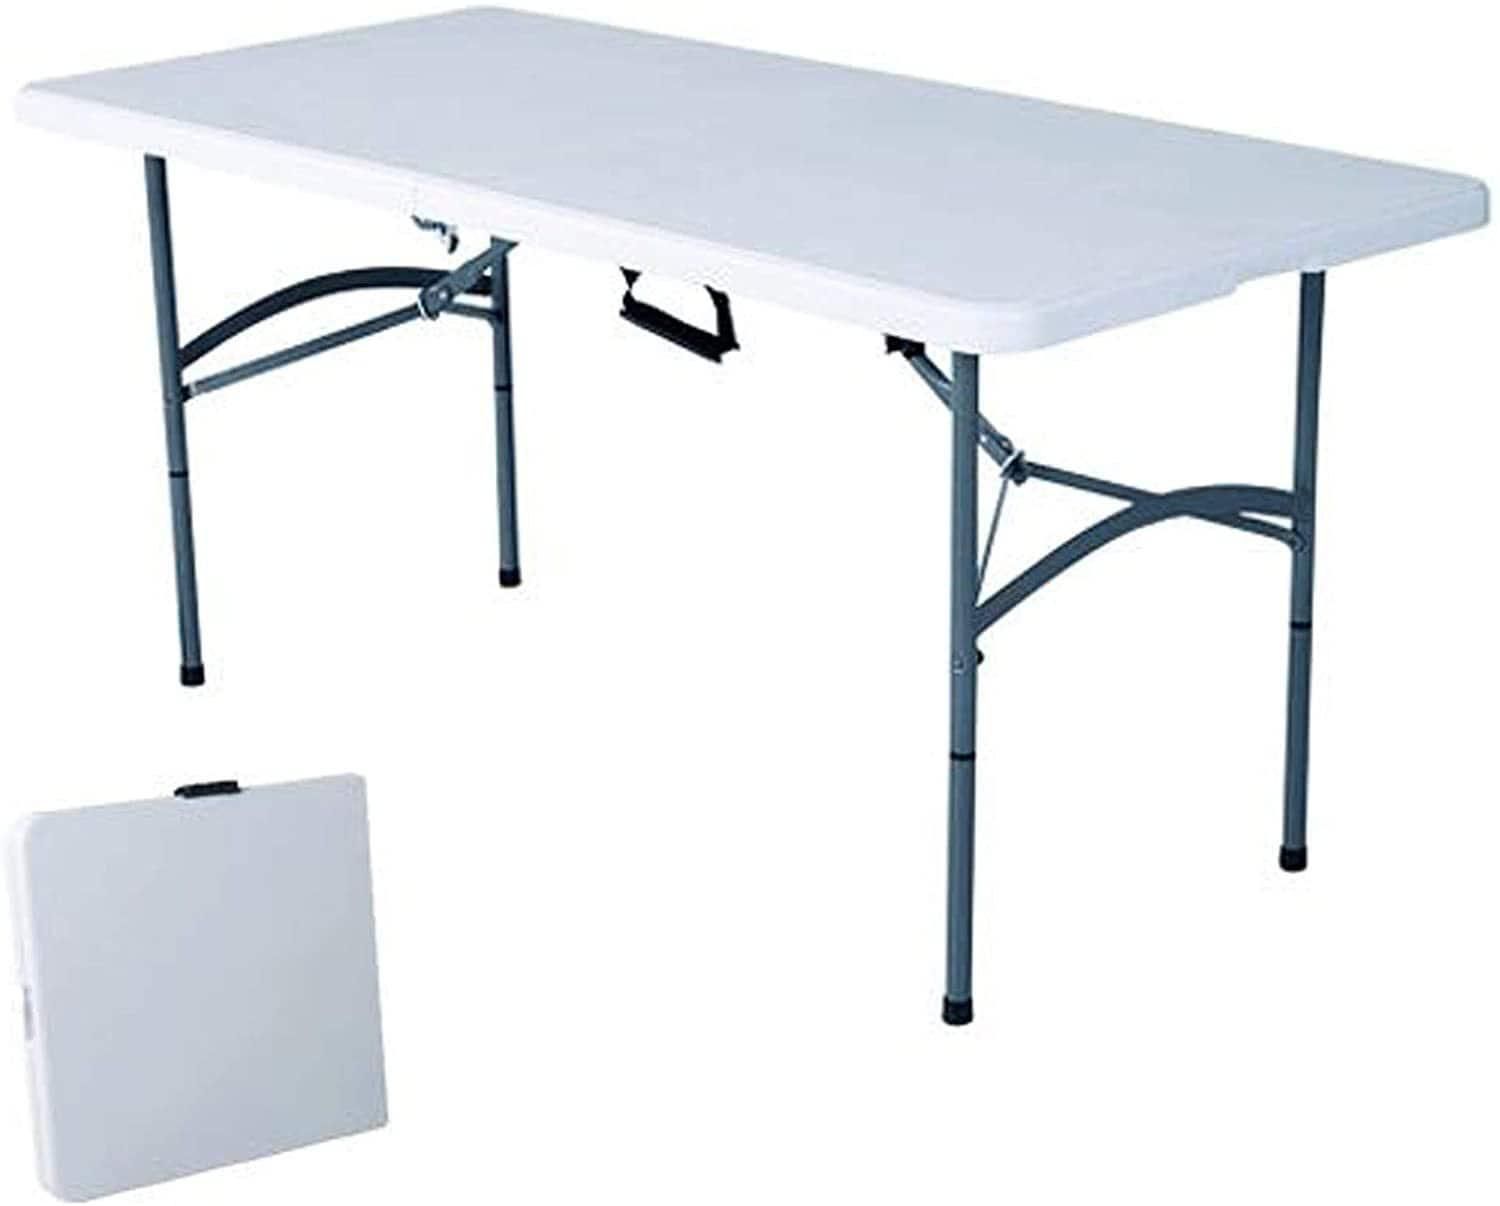 Idealt - Multipurpose Rectangle Table| 5ft Fold-in-Half Portable Plastic Picnic Table | Indoor Outdoor Portable Folding Plastic Dining Table for Picnic, Party, Camp w/Handle and Lock (White, 5)